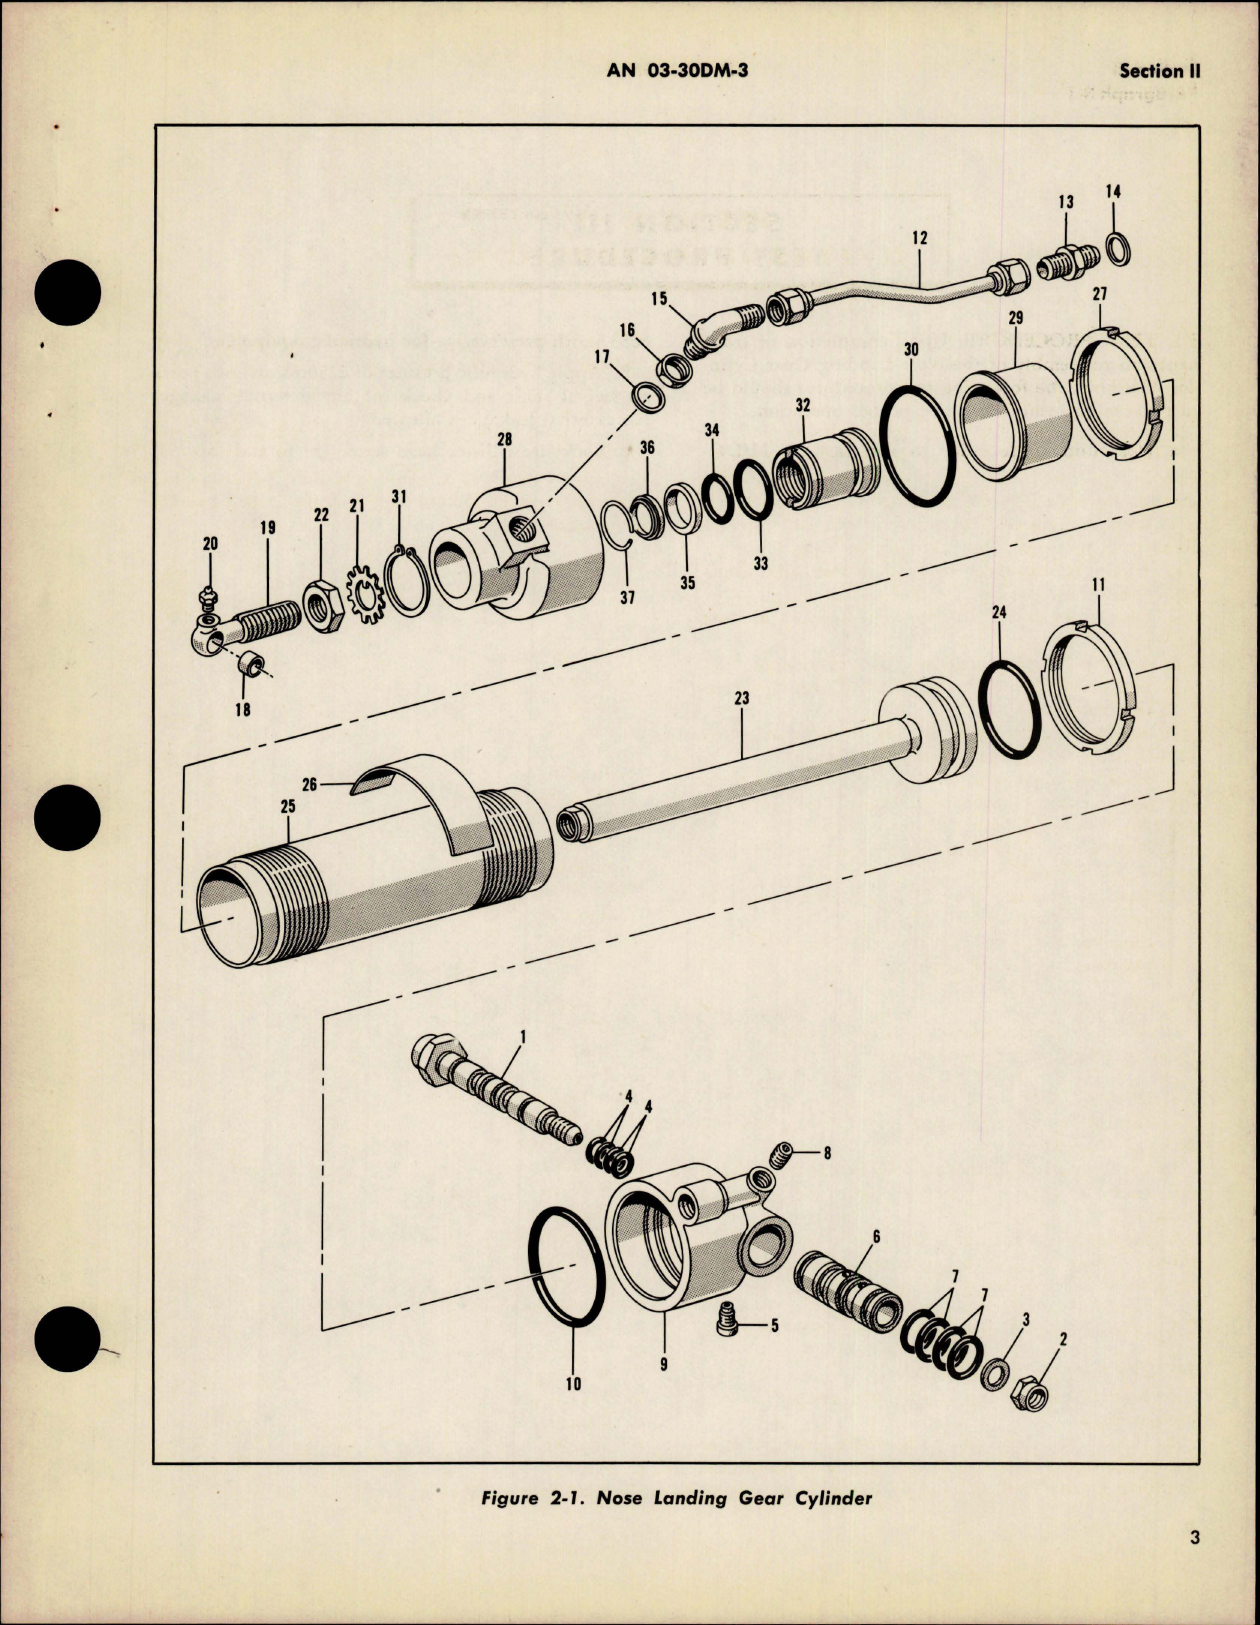 Sample page 5 from AirCorps Library document: Overhaul Instructions for Nose Landing Gear Cylinder Assembly  - Parts 1270, 1270-3, 1270-4, 2687